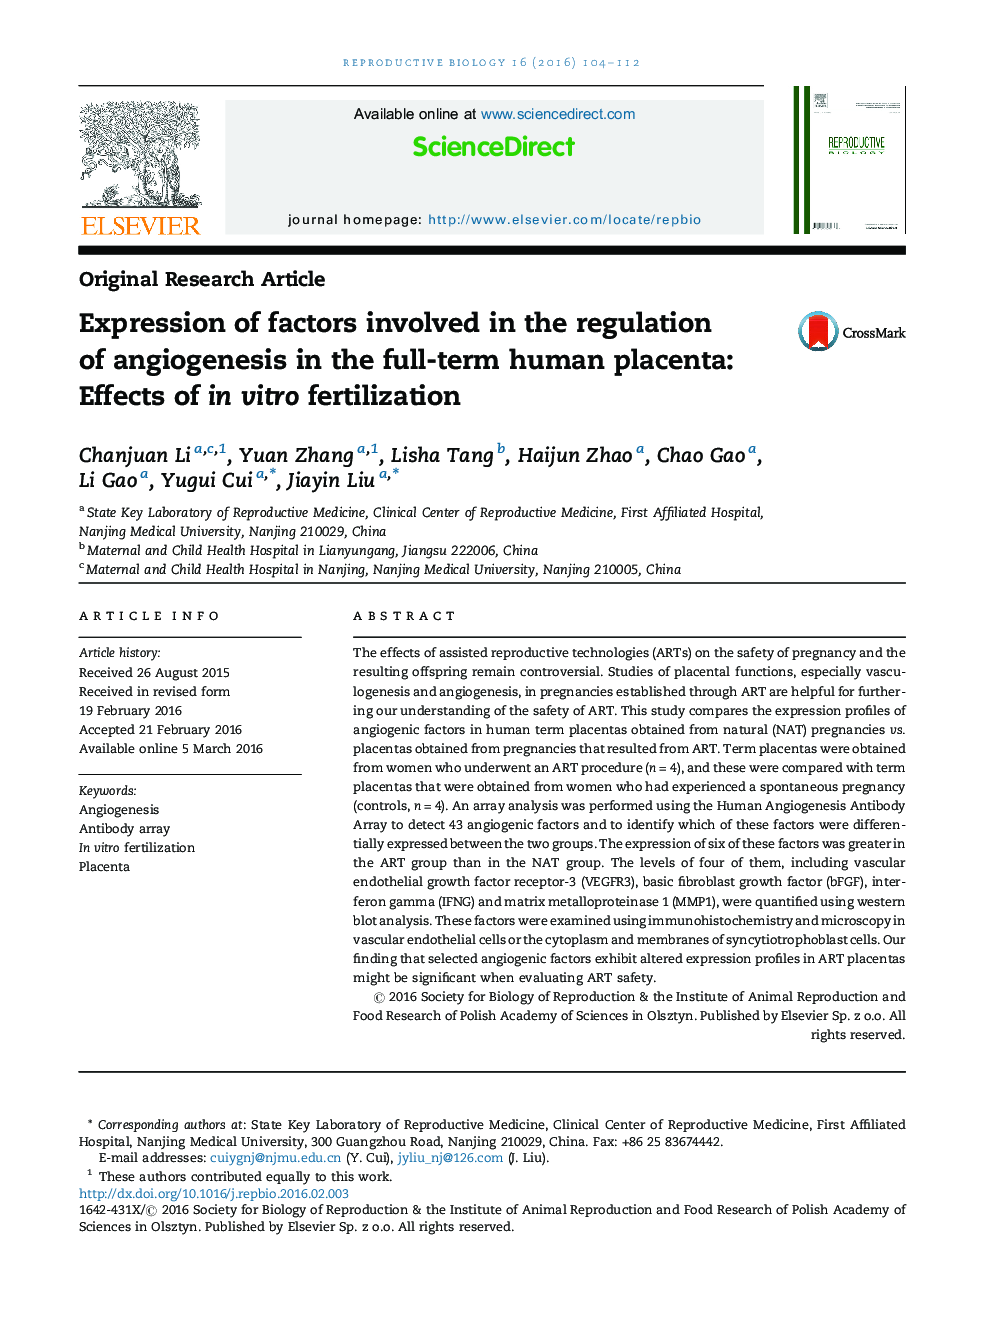 Expression of factors involved in the regulation of angiogenesis in the full-term human placenta: Effects of in vitro fertilization